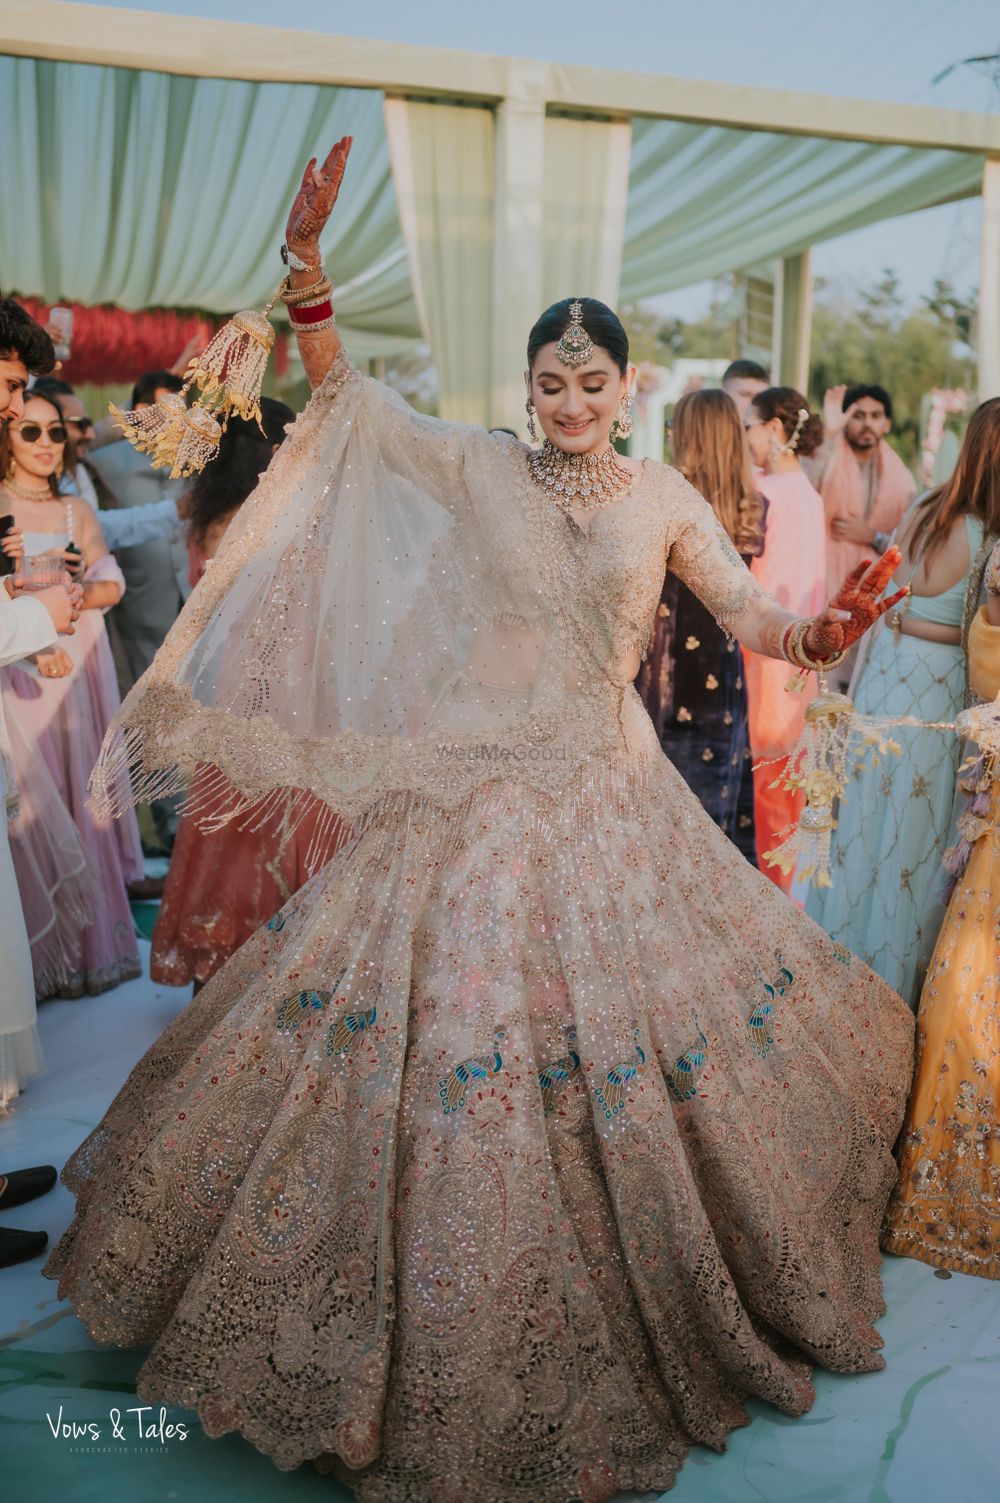 Photo of Fun twirling shot of the bride in a stunning pastel lehenga with peacock detailing on her wedding day